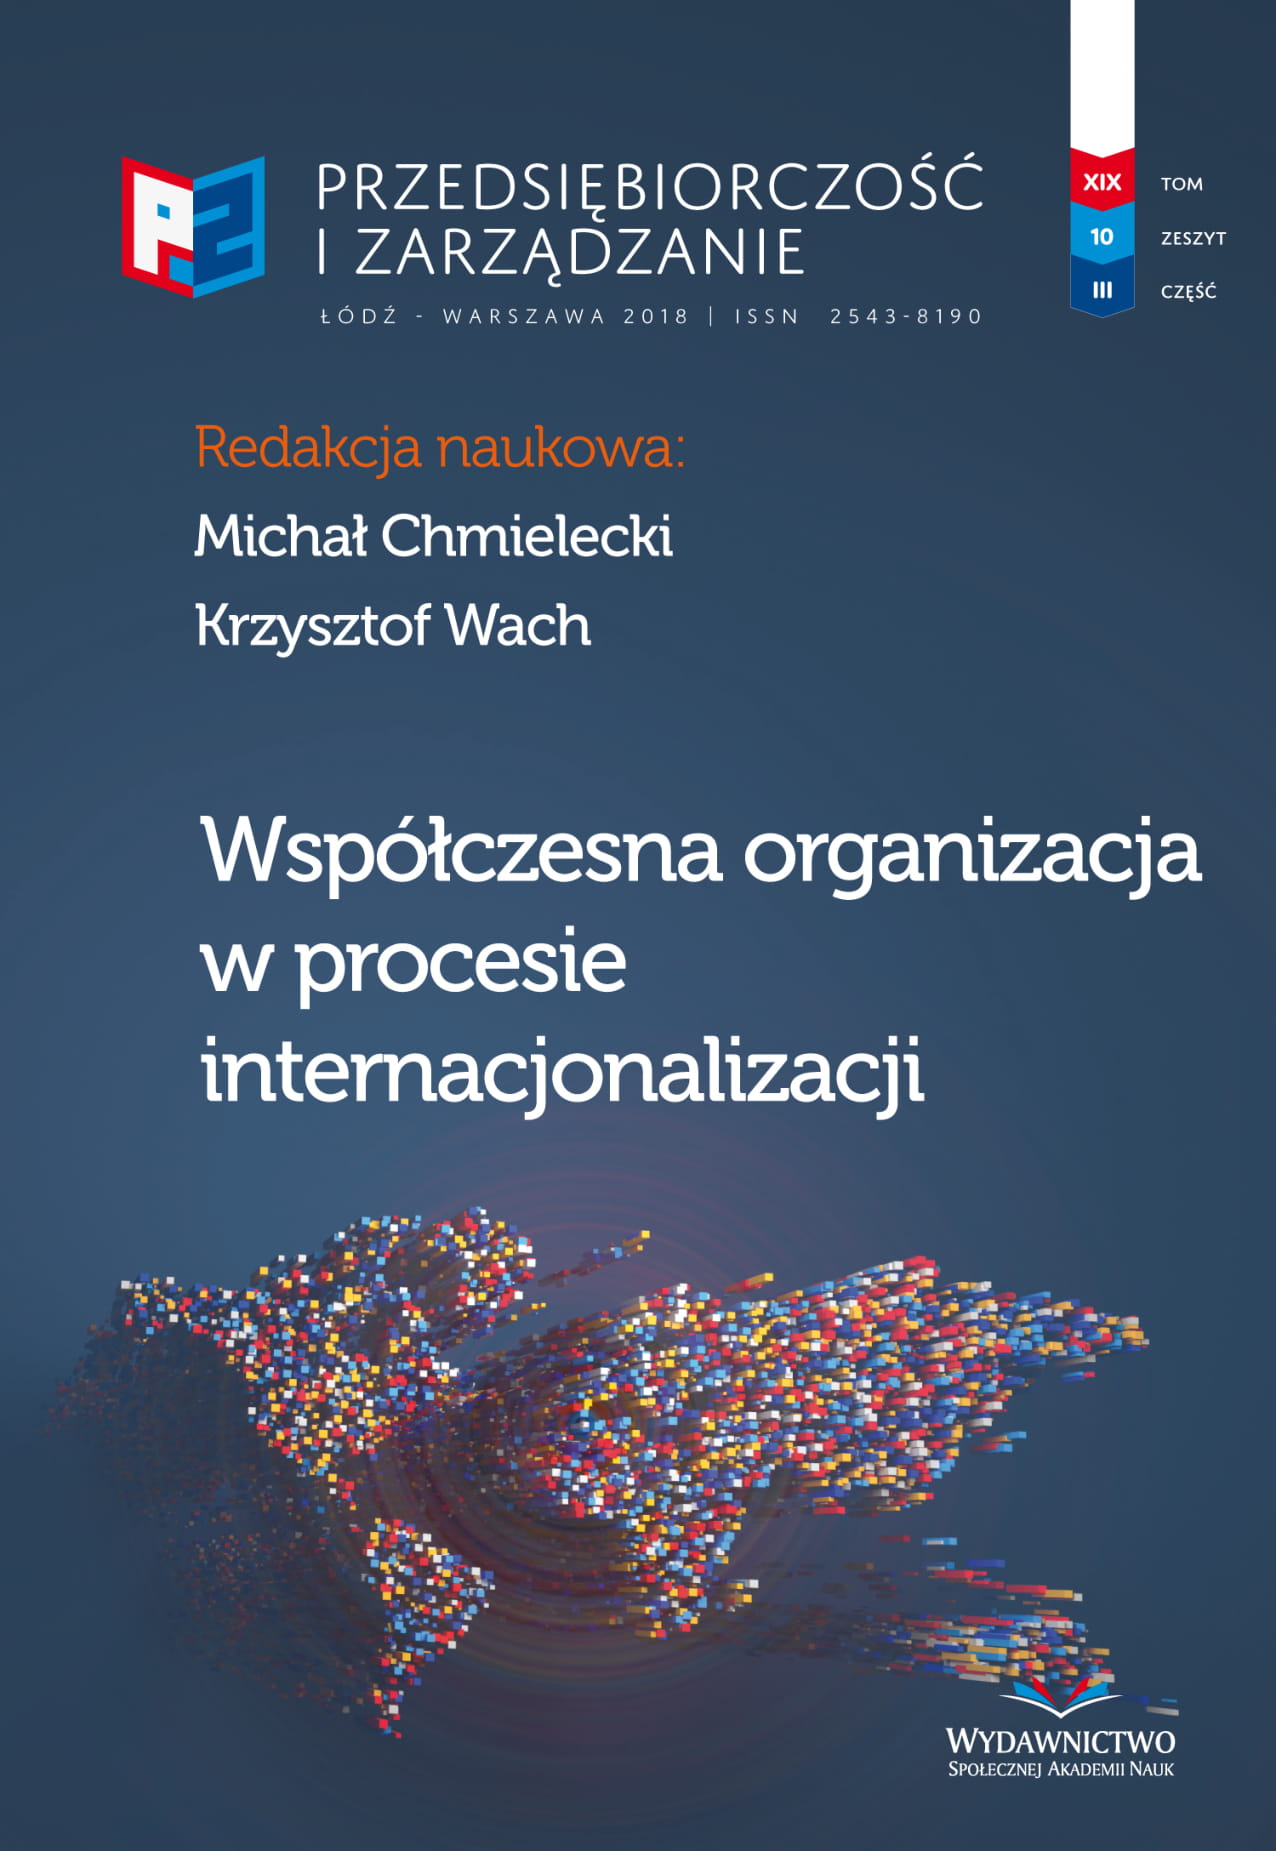 A Requirements for the Risk Management in Information
and Knowledge Security at the University Cover Image